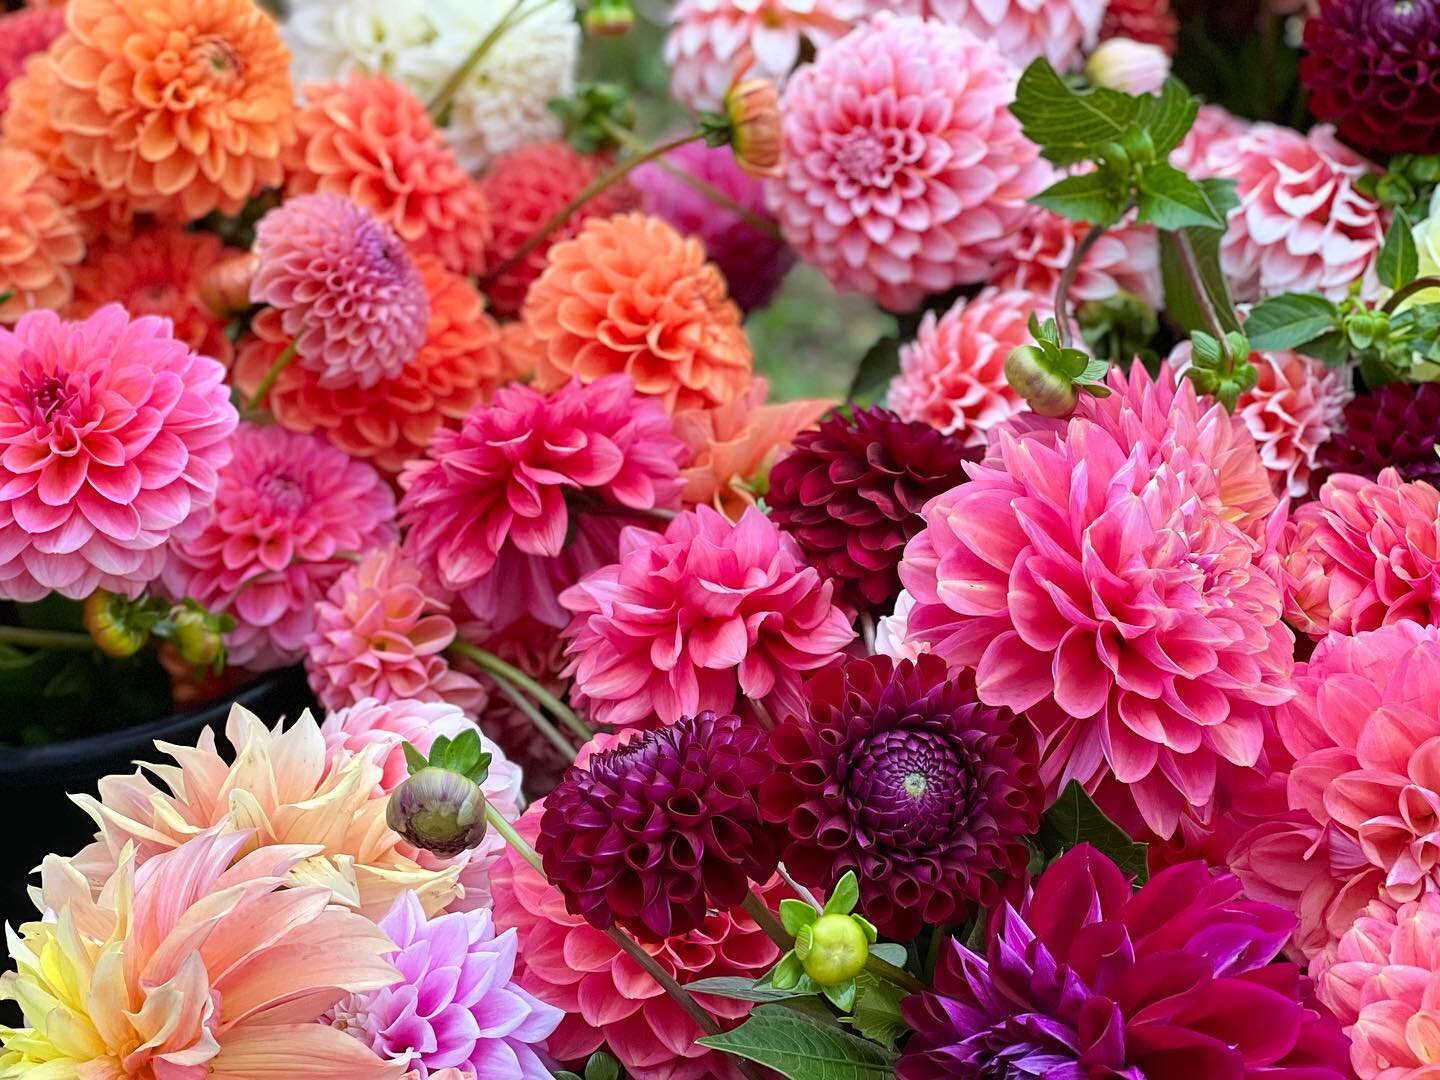 This is the last week of our fall dahlia subscription, we hope you all enjoyed these beauties! Stand will be OPEN tomorrow 3-6ishpm. We will also have sunflowers! 🌻 🌻

The stand will continue to be open on Fridays until the first frost ❄️, stop by 